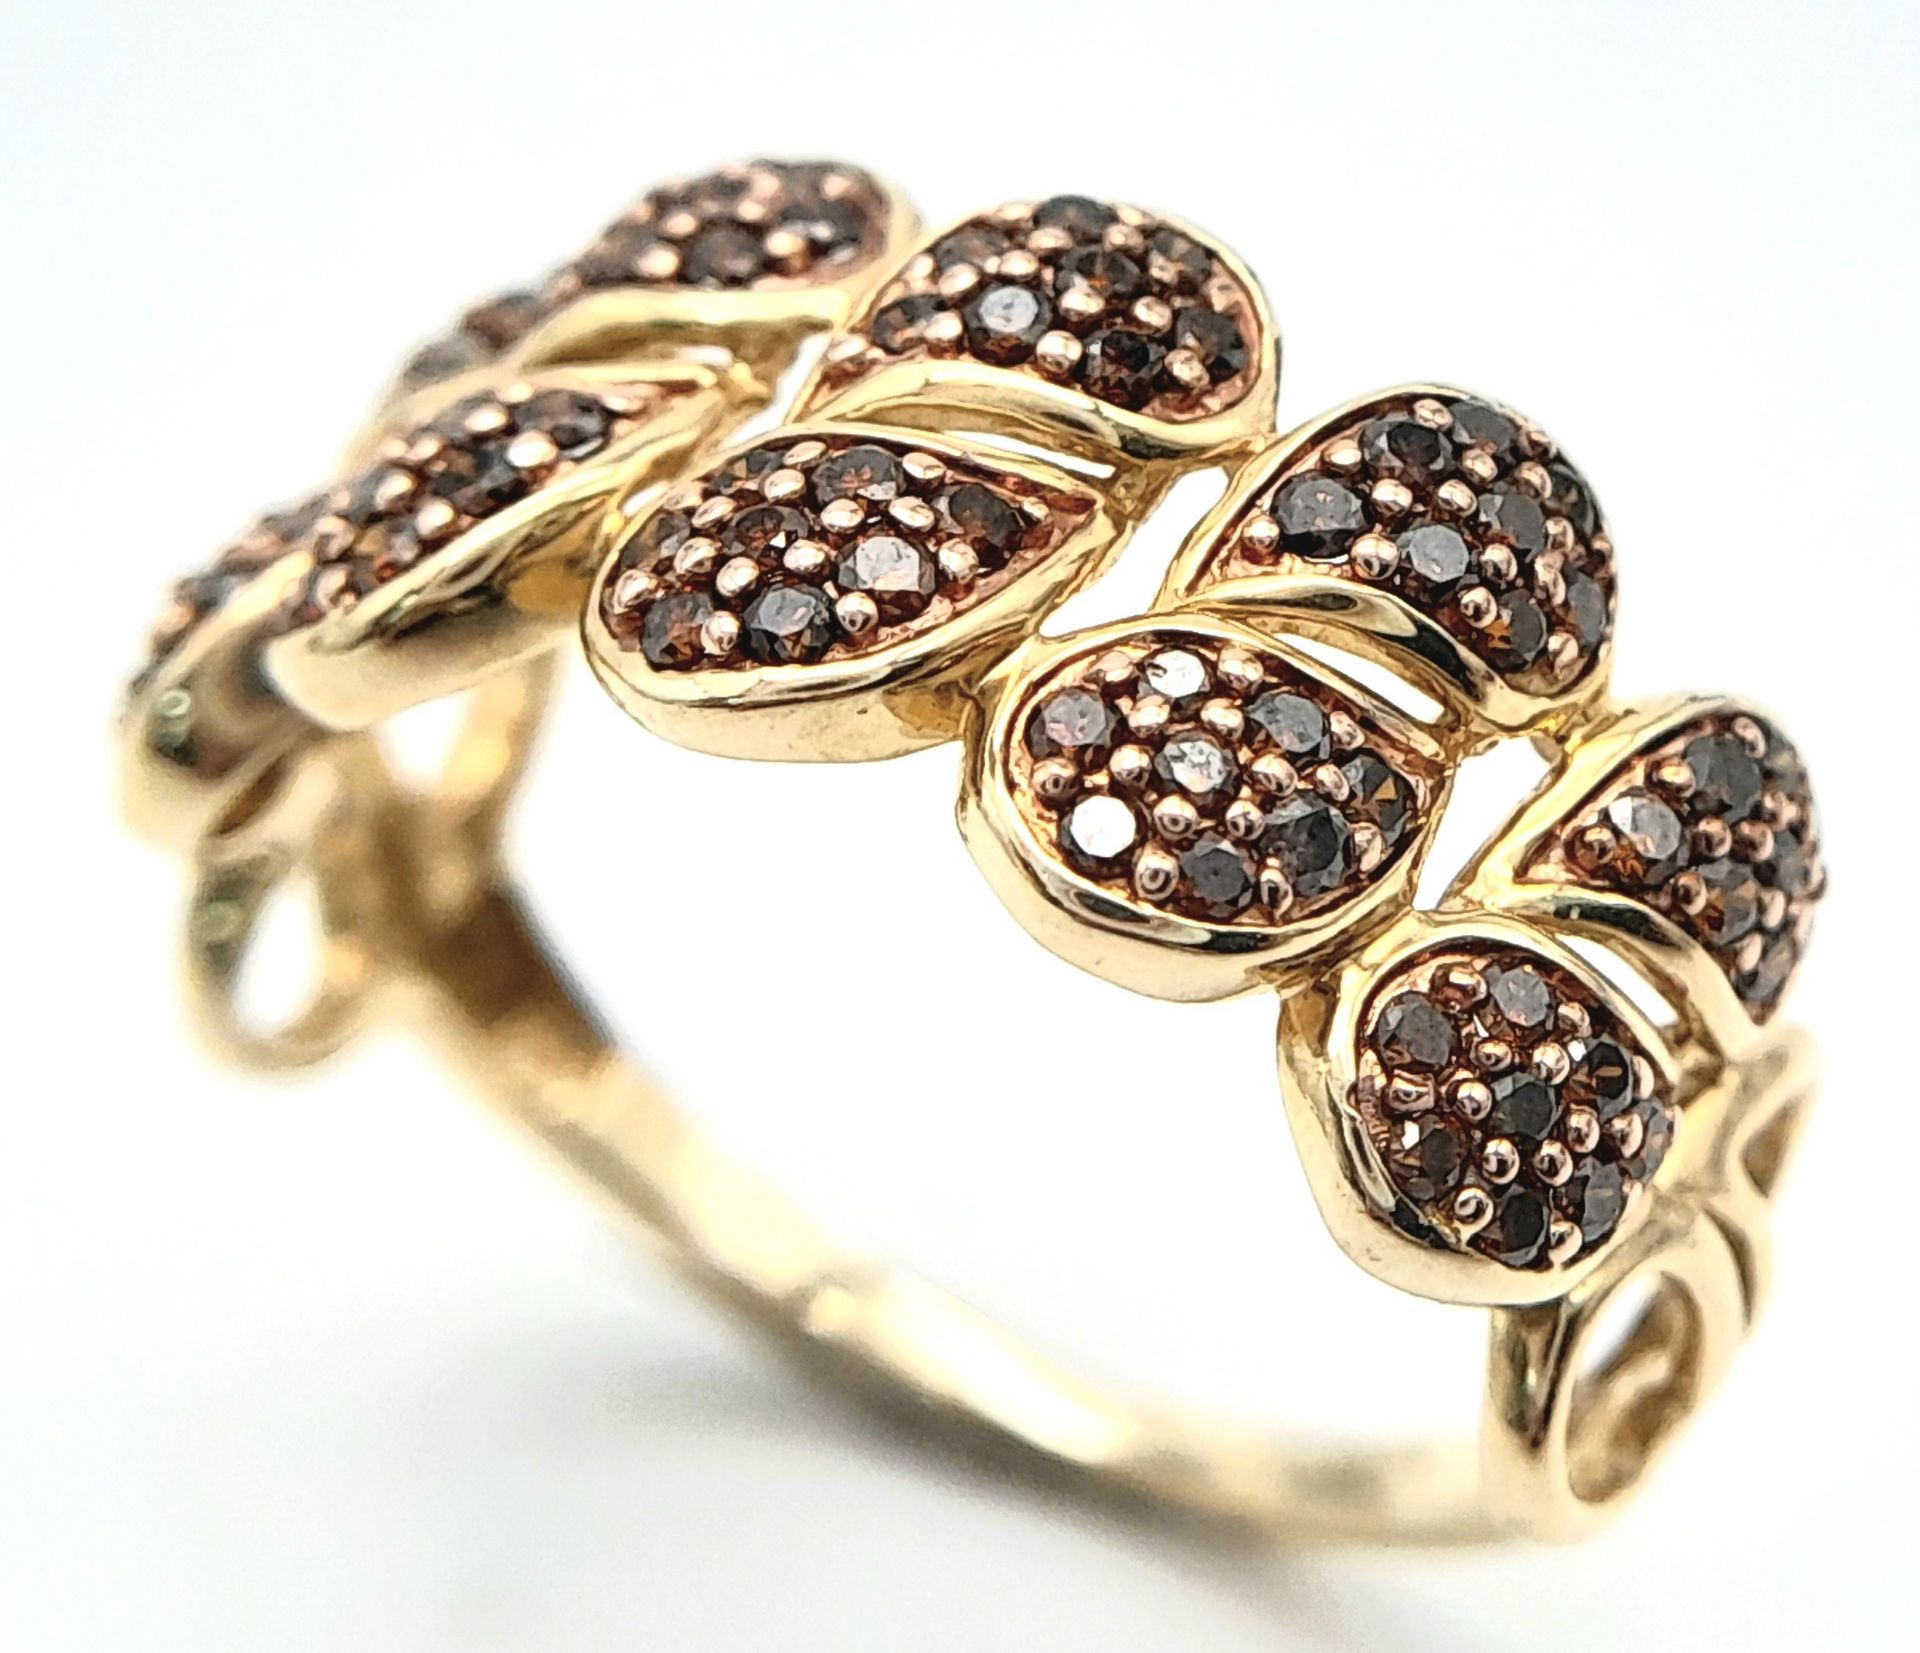 A 9K YELLOW GOLD COLOURED DIAMOND SET RING. 0.80ctw, Size N, 2.2g total weight. Ref: SC 8036 - Image 6 of 7